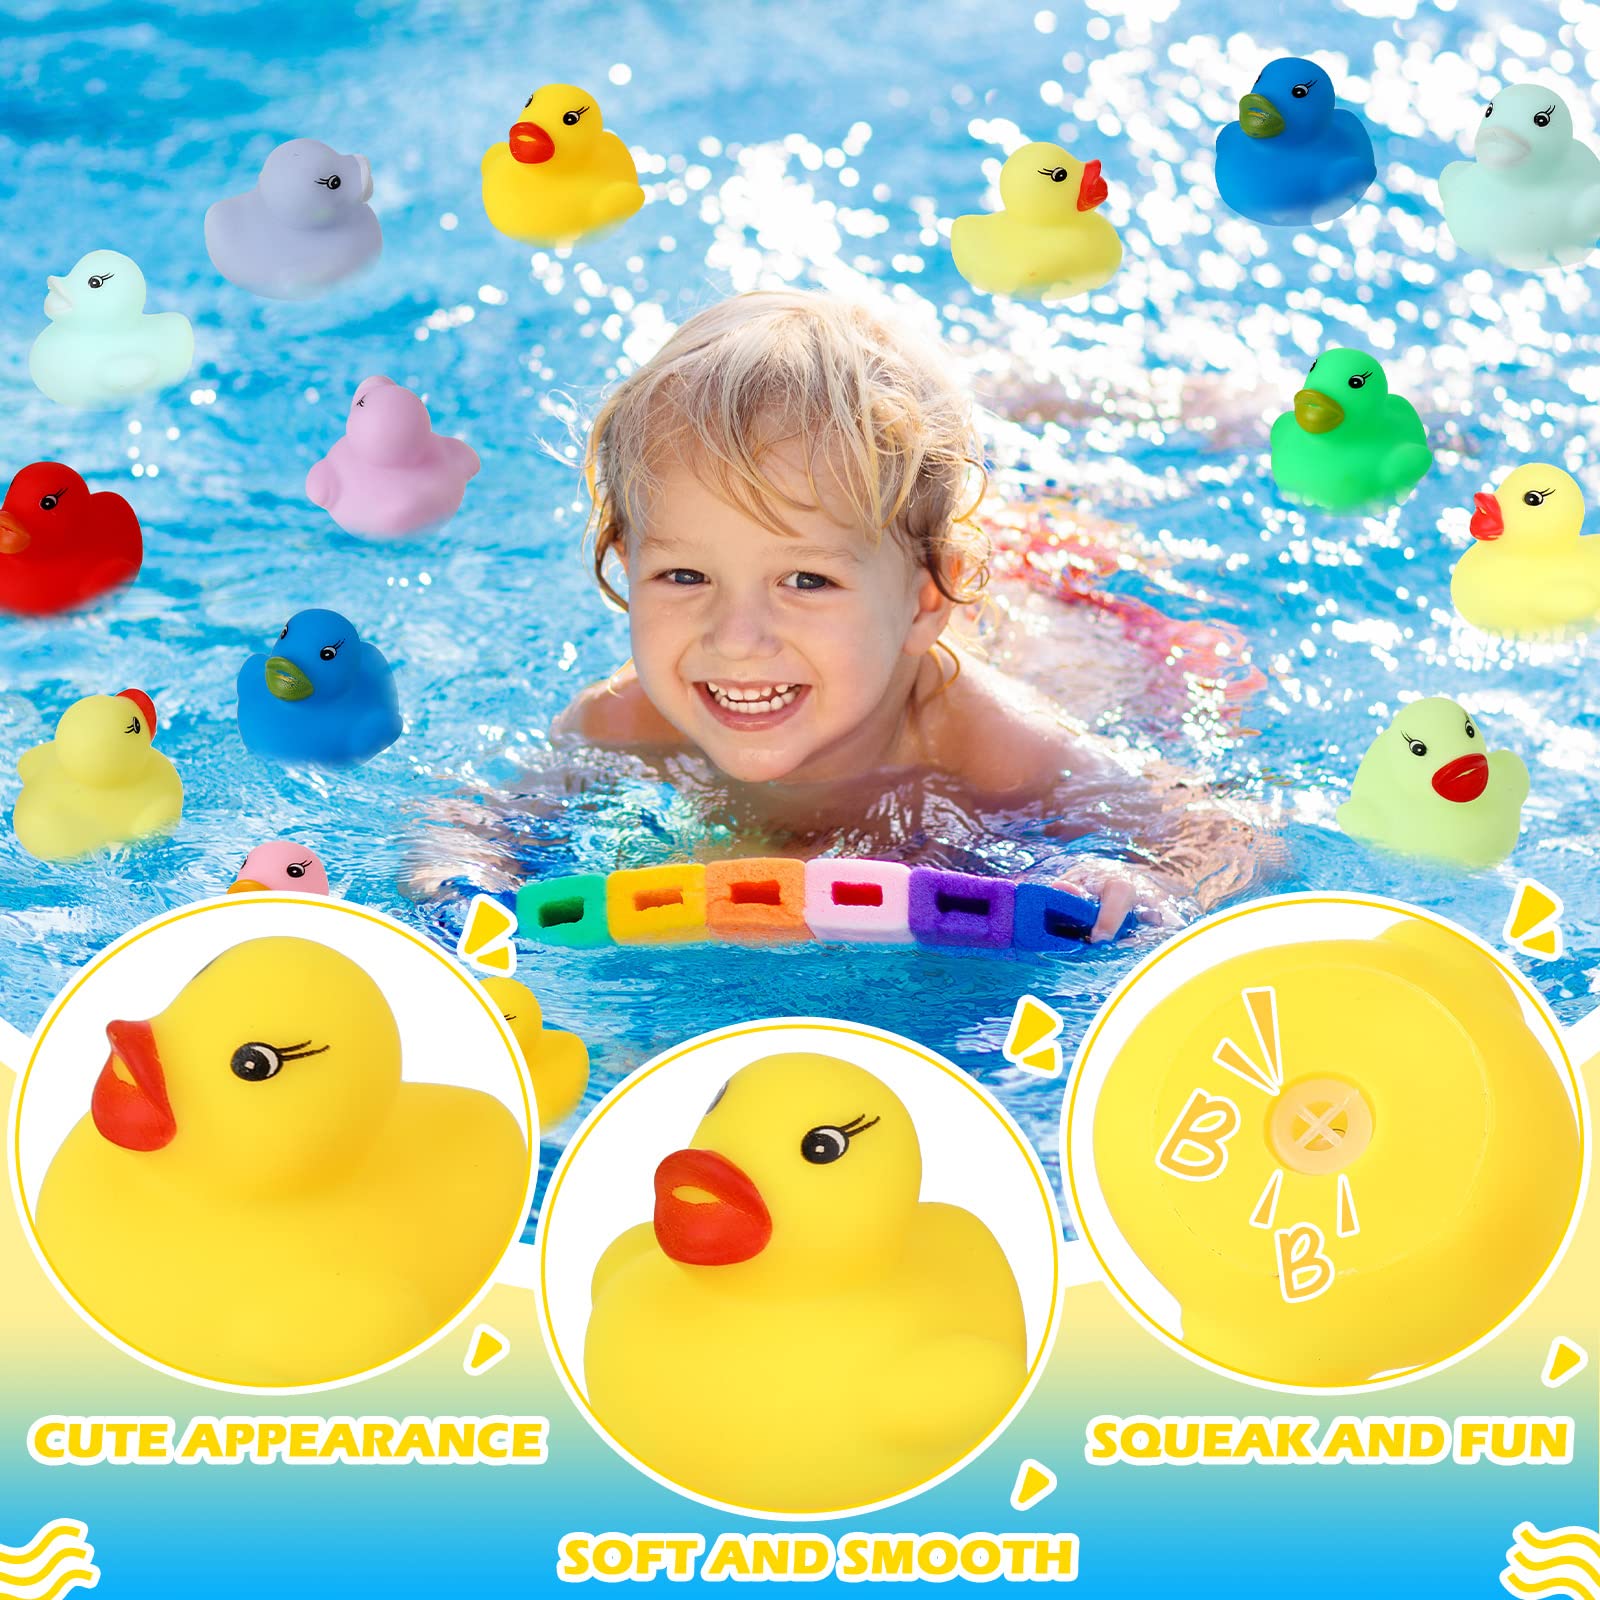 600 Pieces Rubber Duck in Bulk Bath Toys Set Bulk Mini Colorful Ducks Baby Shower Toy Birthday Party Decorations Favors Gift Classroom Summer Beach Pool Activity Carnival Game (600 Pieces)